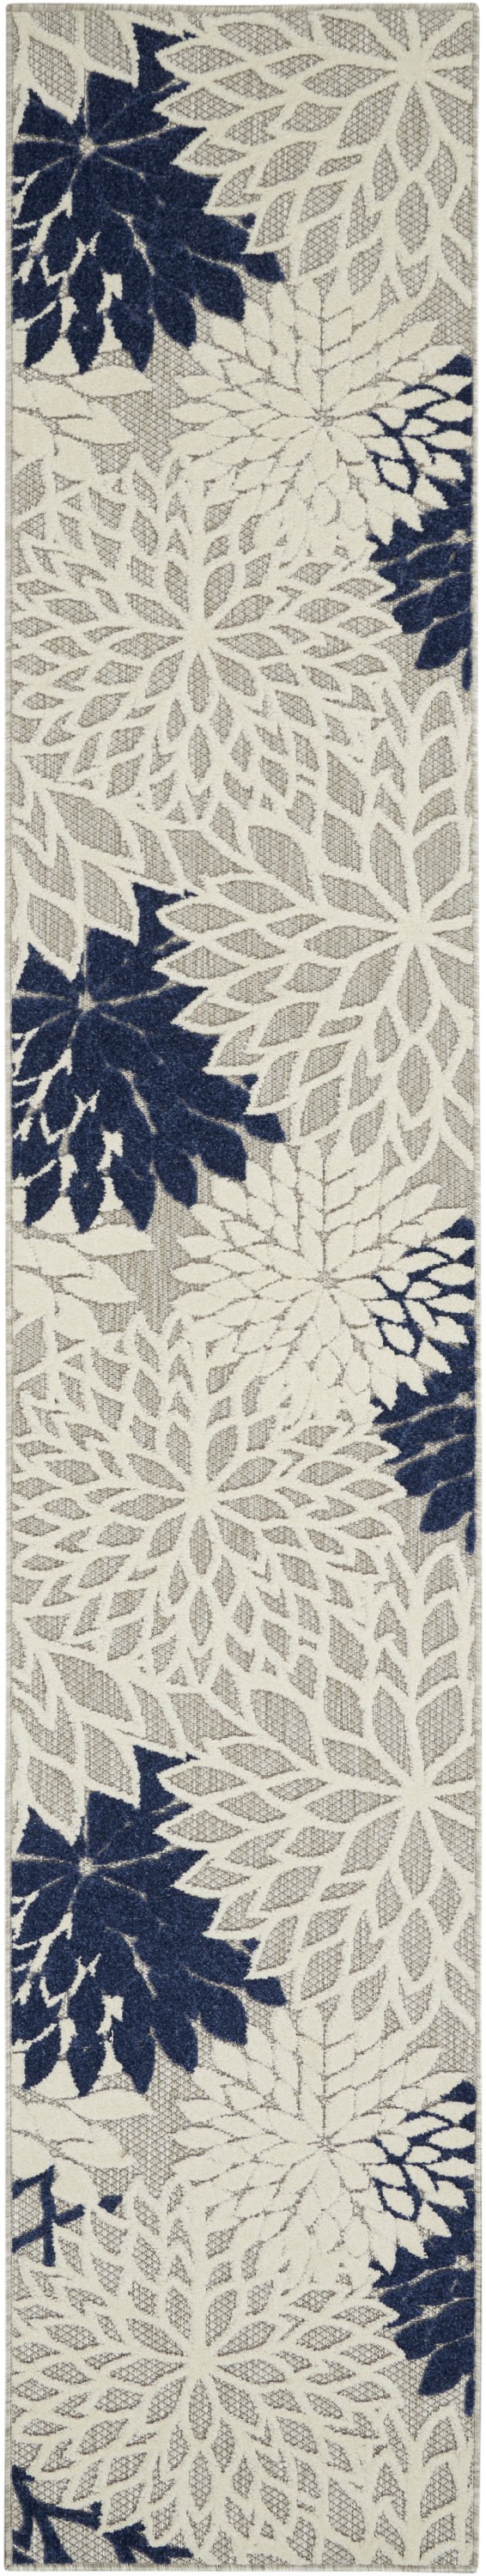 2' X 10' Ivory And Blue Floral Indoor Outdoor Area Rug-384827-1